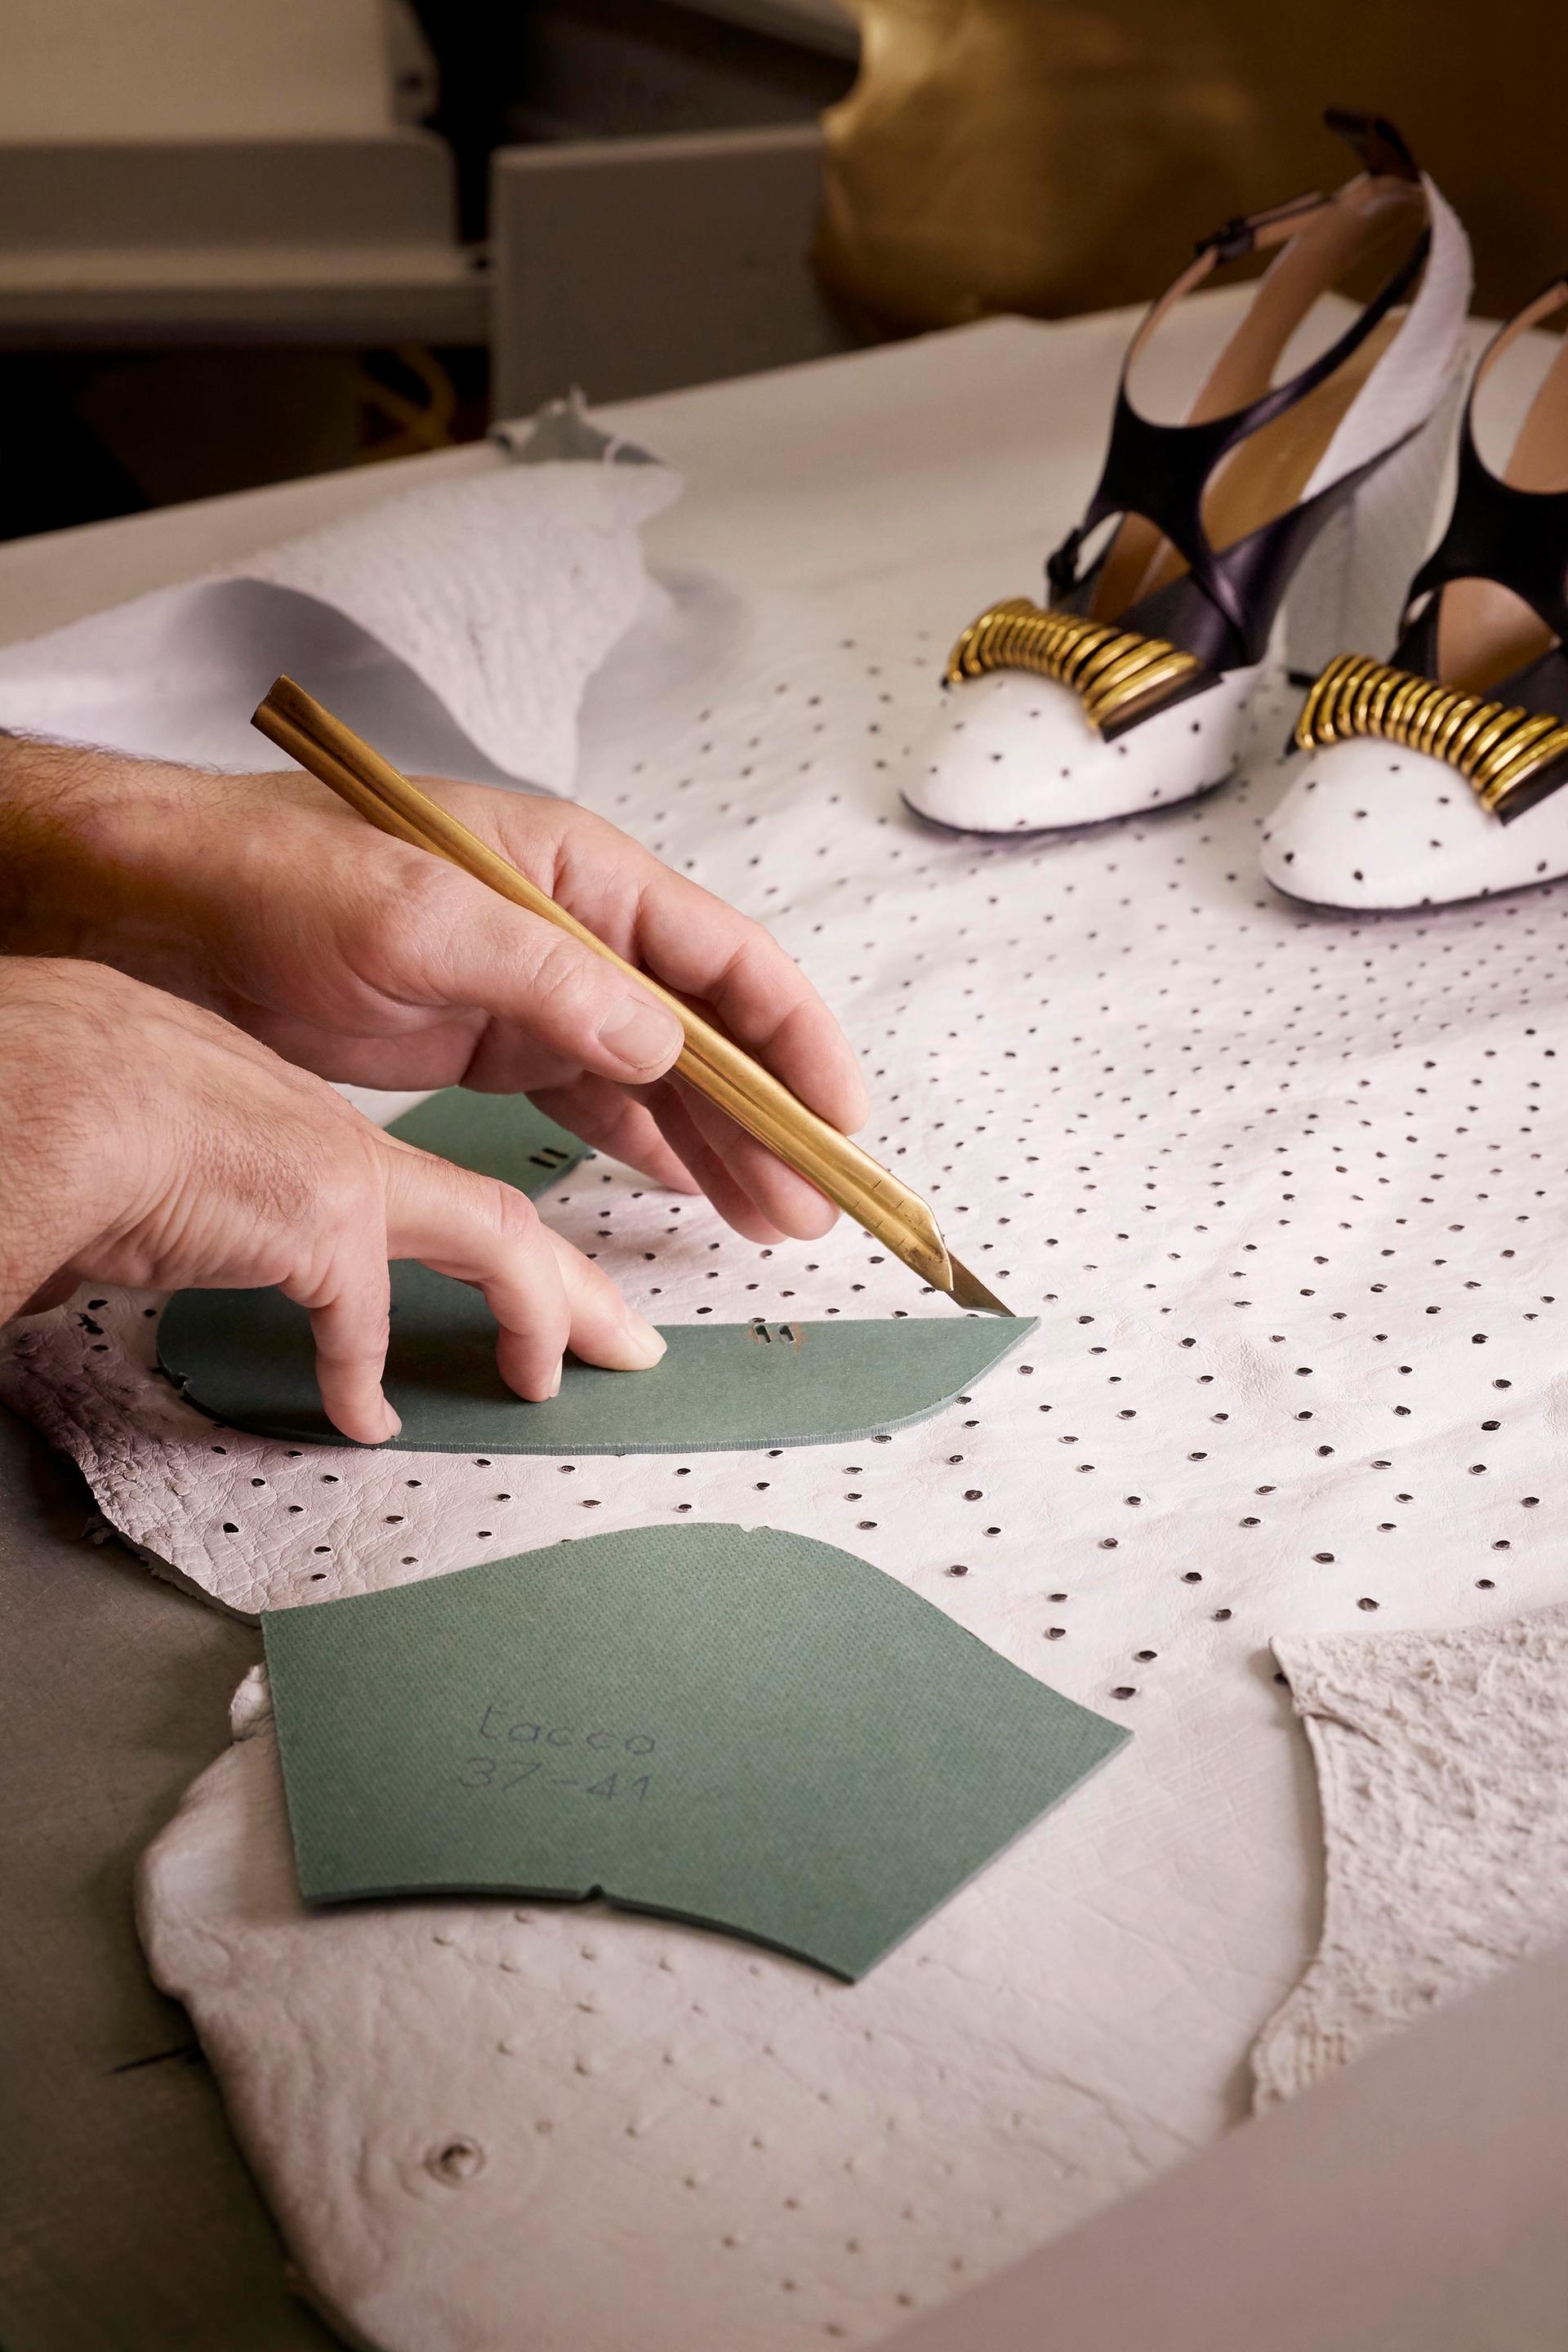 See Inside Louis Vuitton's Artisanal Shoe Factory - Behind The Scenes